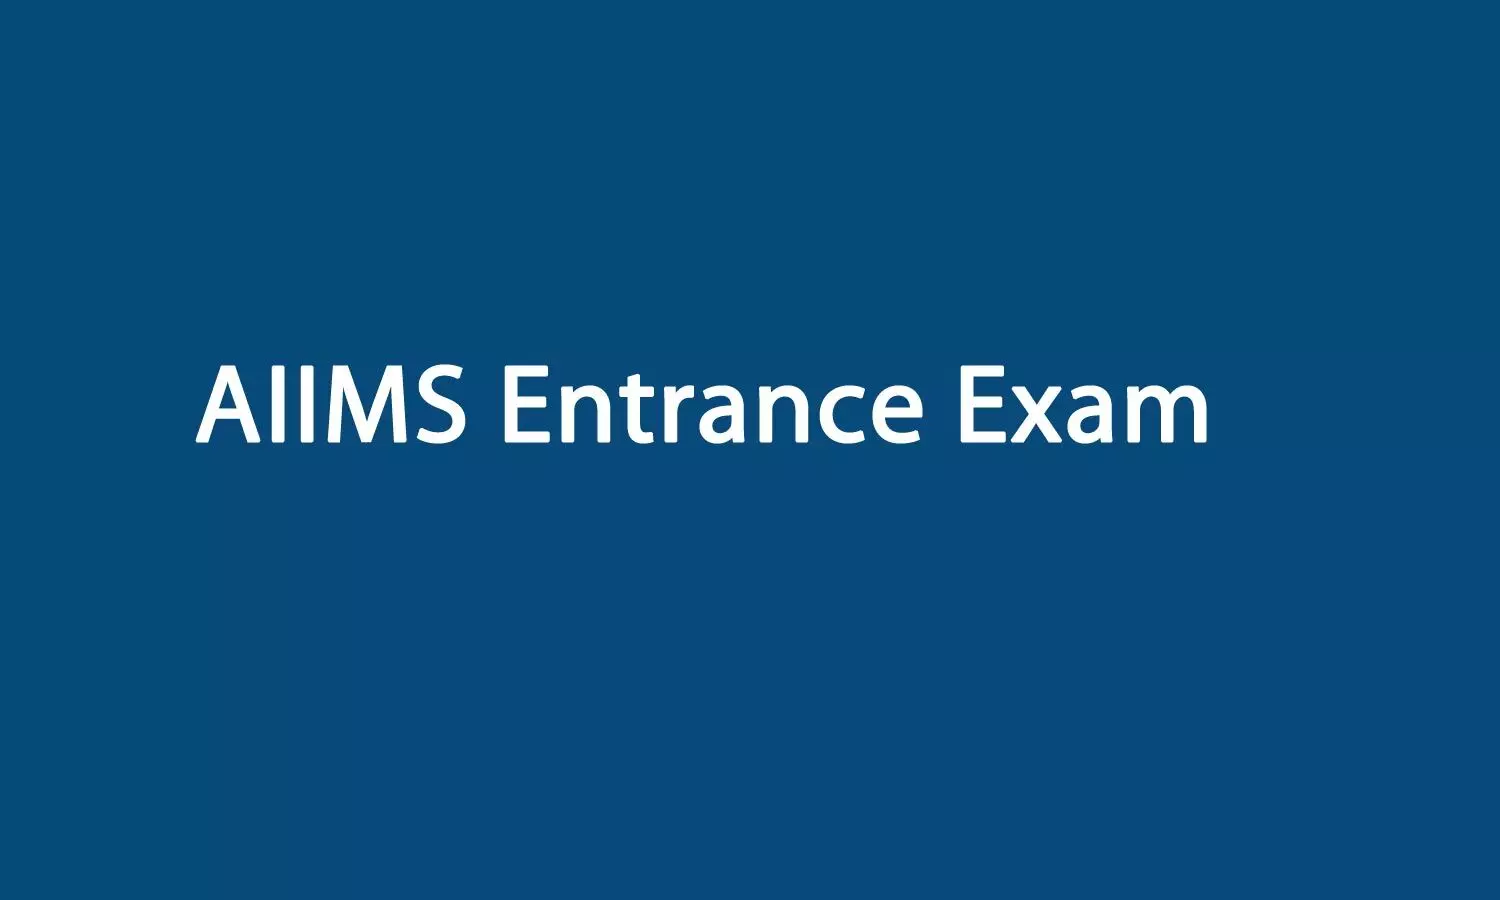 AIIMS releases entrance exam dates for DM, MCh, MD Hospital Administration January 2021